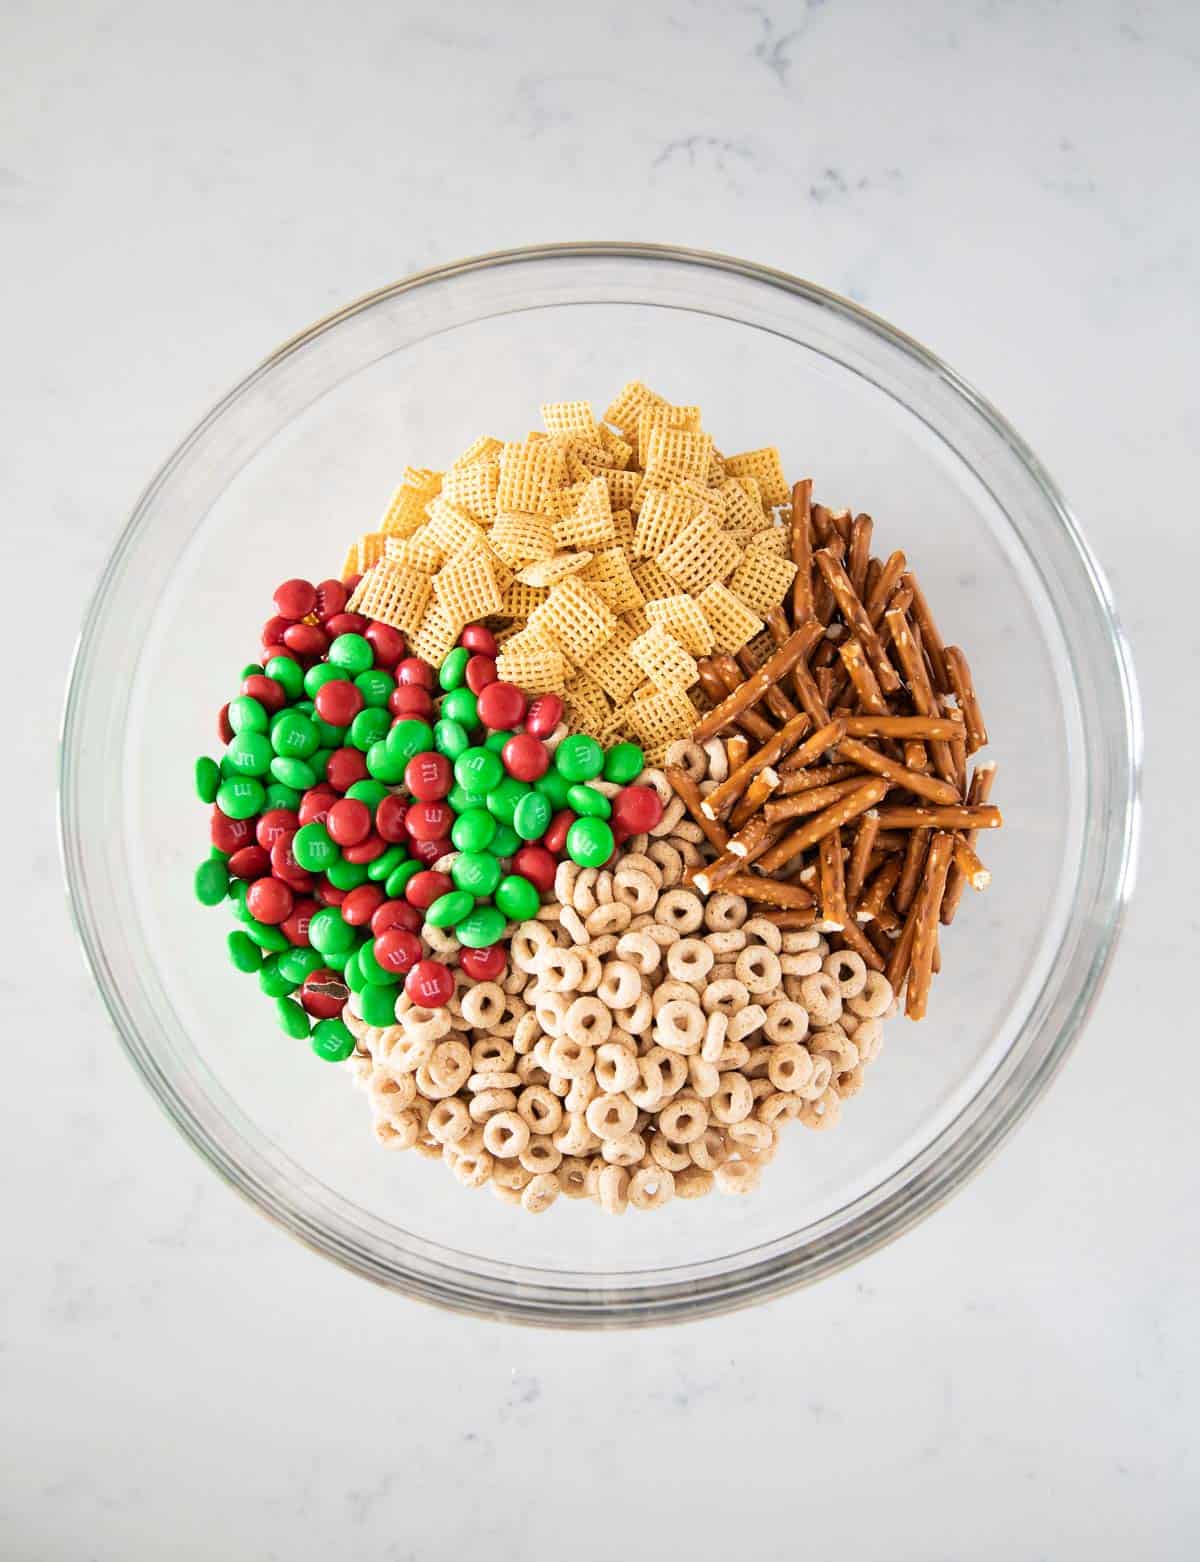 Chex mix, pretzels, cheerios, and m&ms in bowl.